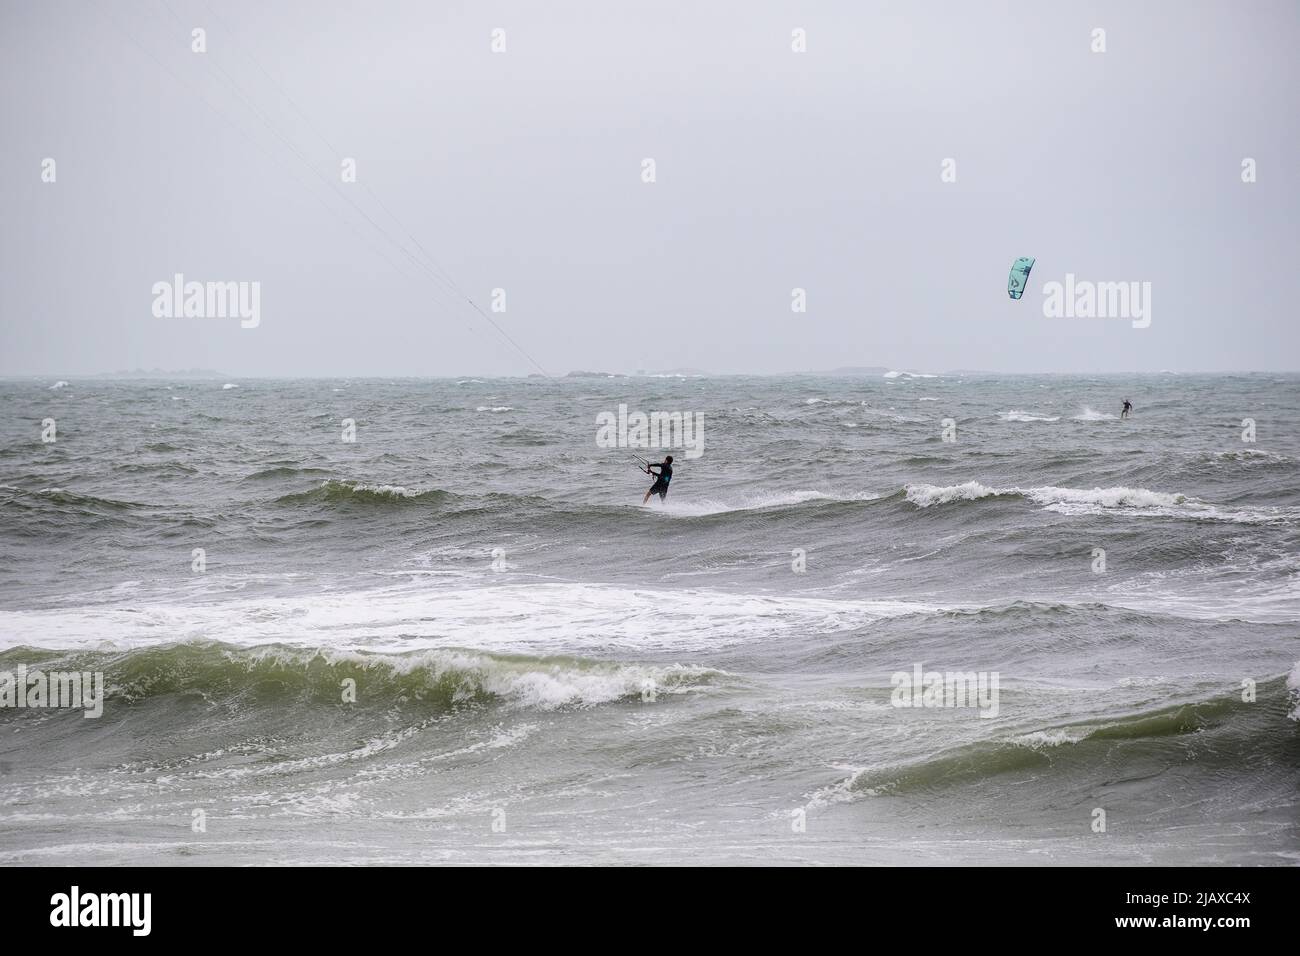 Stock photos of tropical storm Henri in 2021, Newport, RI. Kite Surfing in extreme weather. Breaking Waves, Crashing Waves. Stock Photo